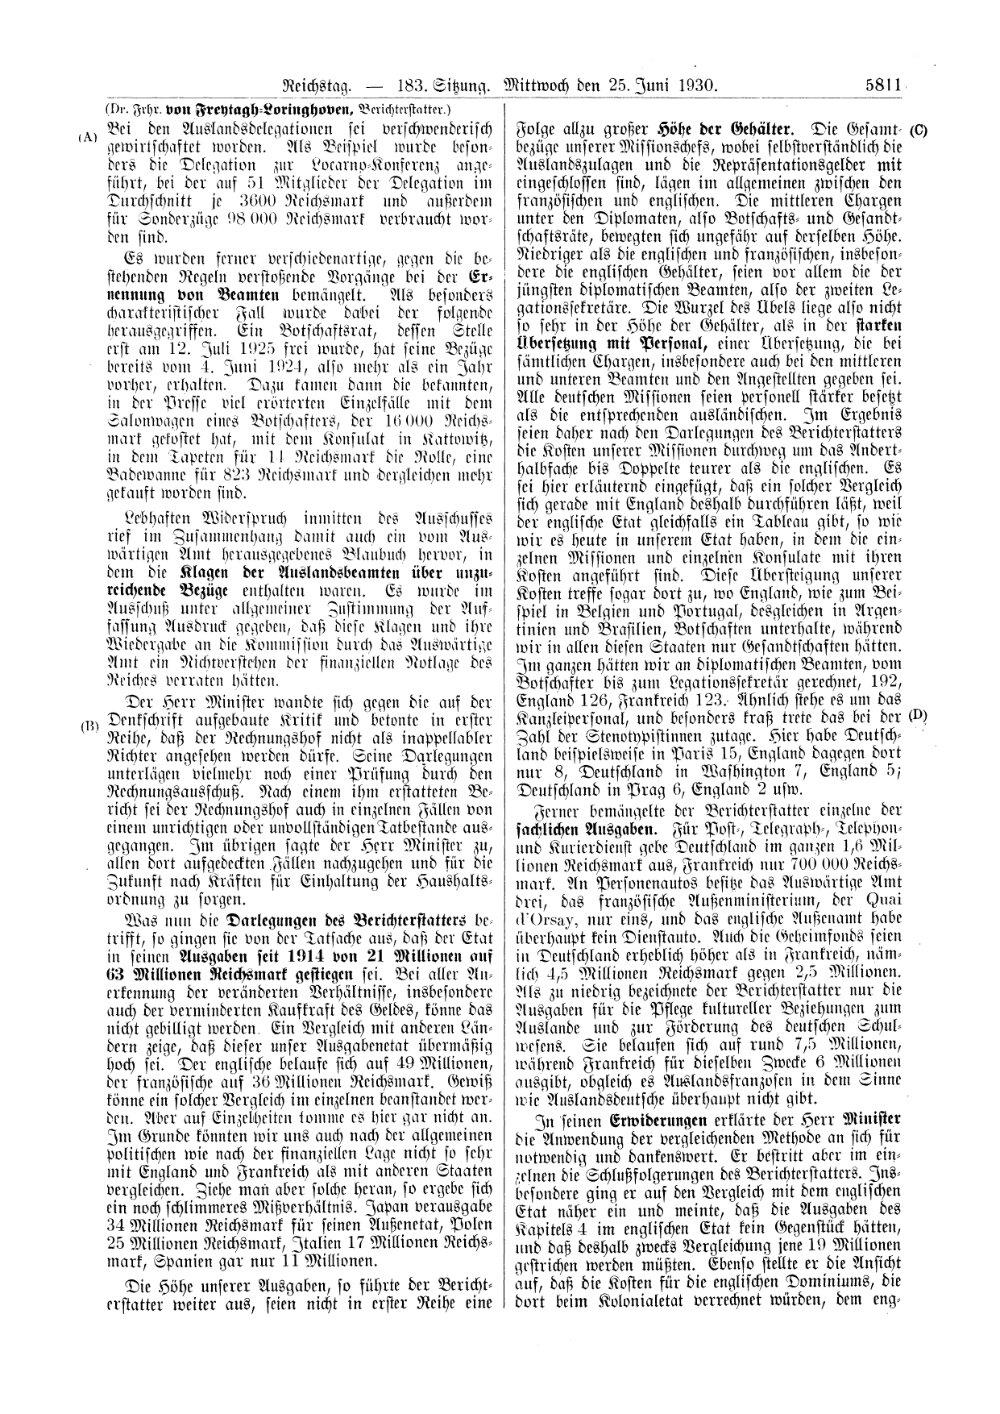 Scan of page 5811